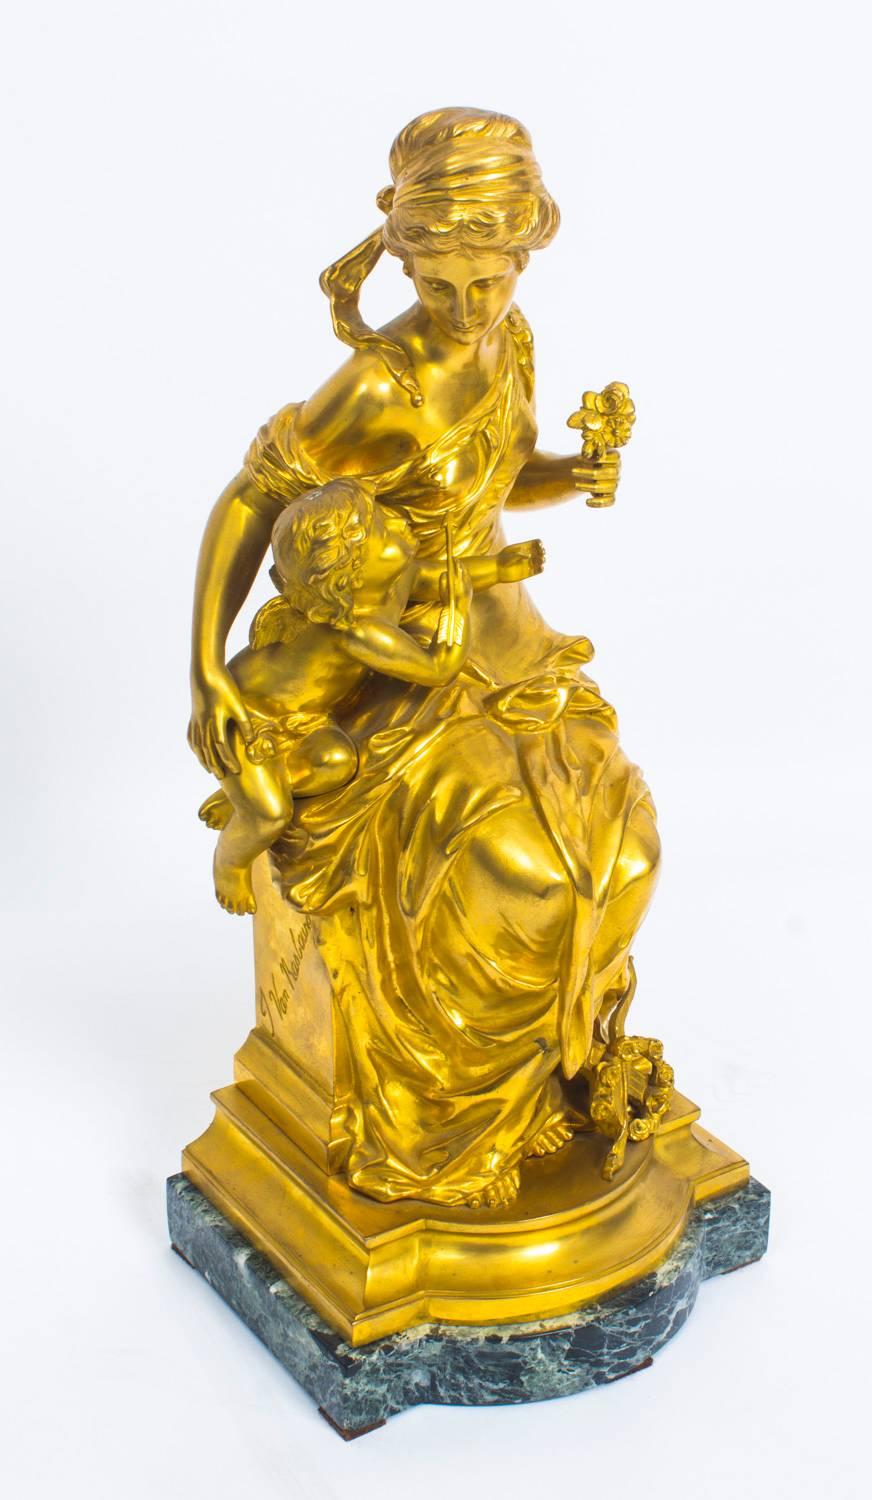 A beautiful gilt bronze sculpture of Cupid and Venus by Antoine Joseph Van Rasbourg (Belgium, 1831-1902) Circa 1860 in date.

The sculpture portrays the classically dressed goddess Venus holding the winged Cupid while he points an arrow  at her